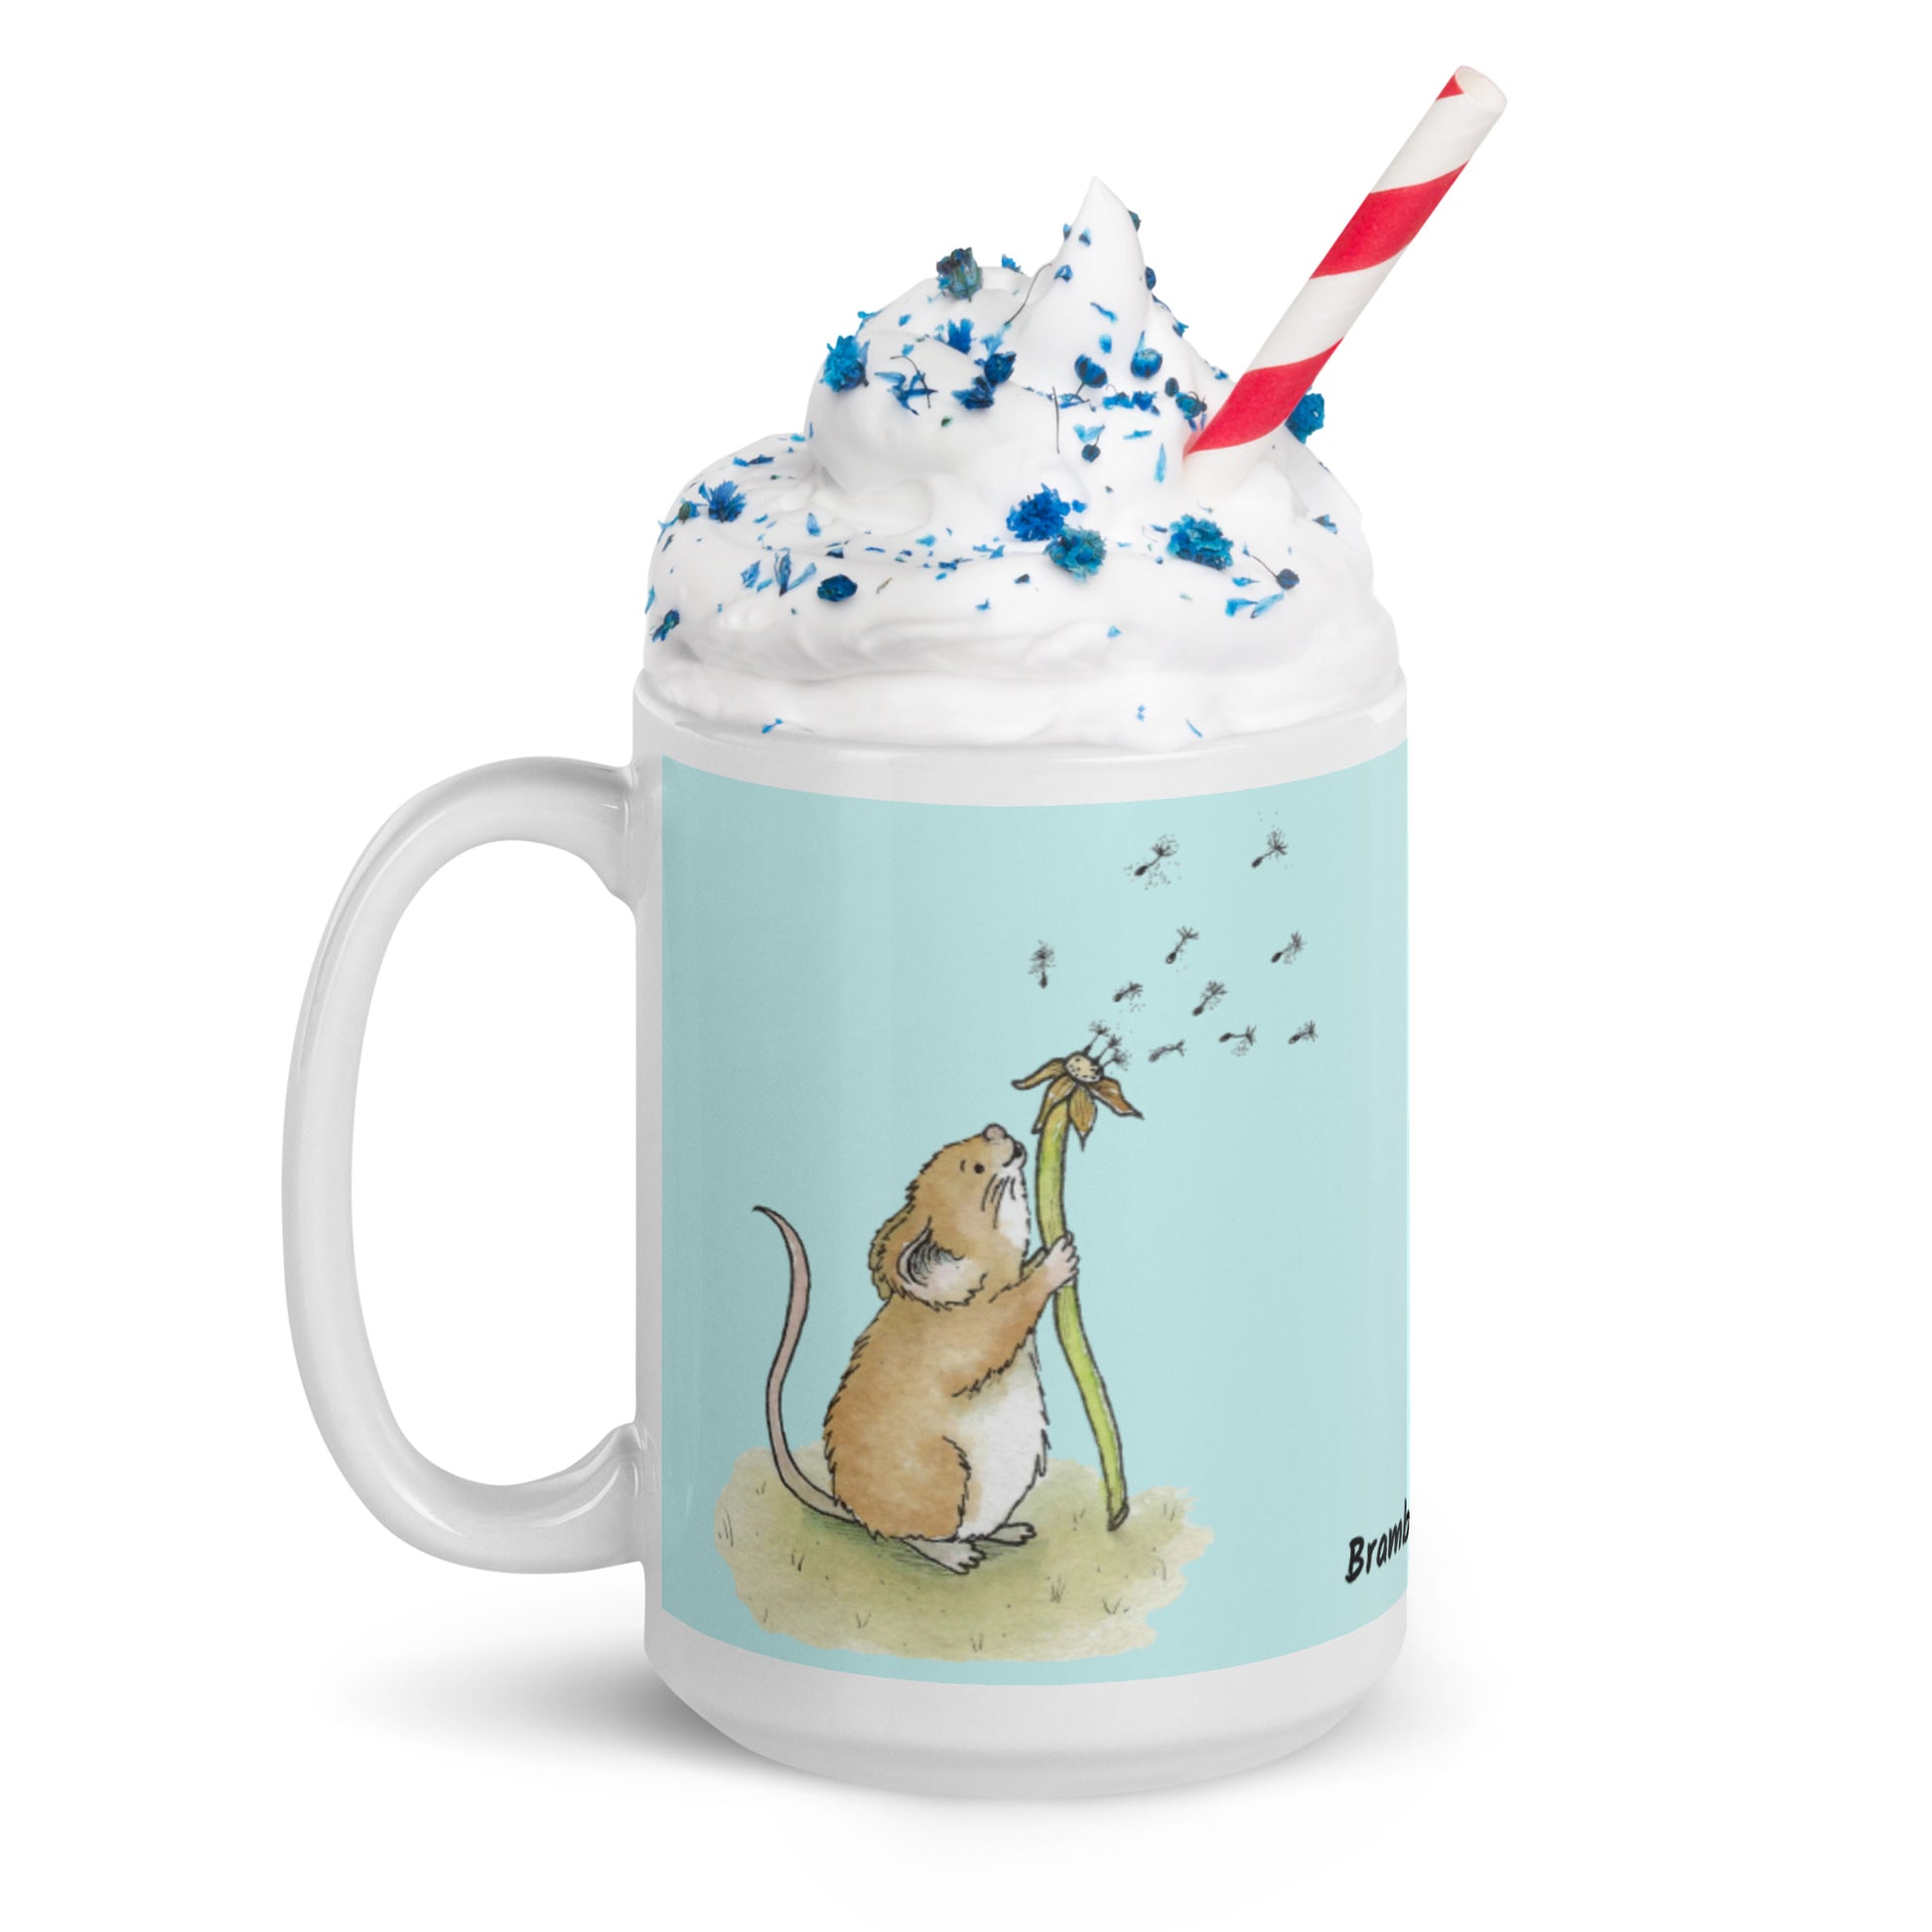 Two-sided image of original Dandelion wish design of cute watercolor mouse blowing dandelion seeds  featured on 15 ounce mug with light blue background. Handle facing left.